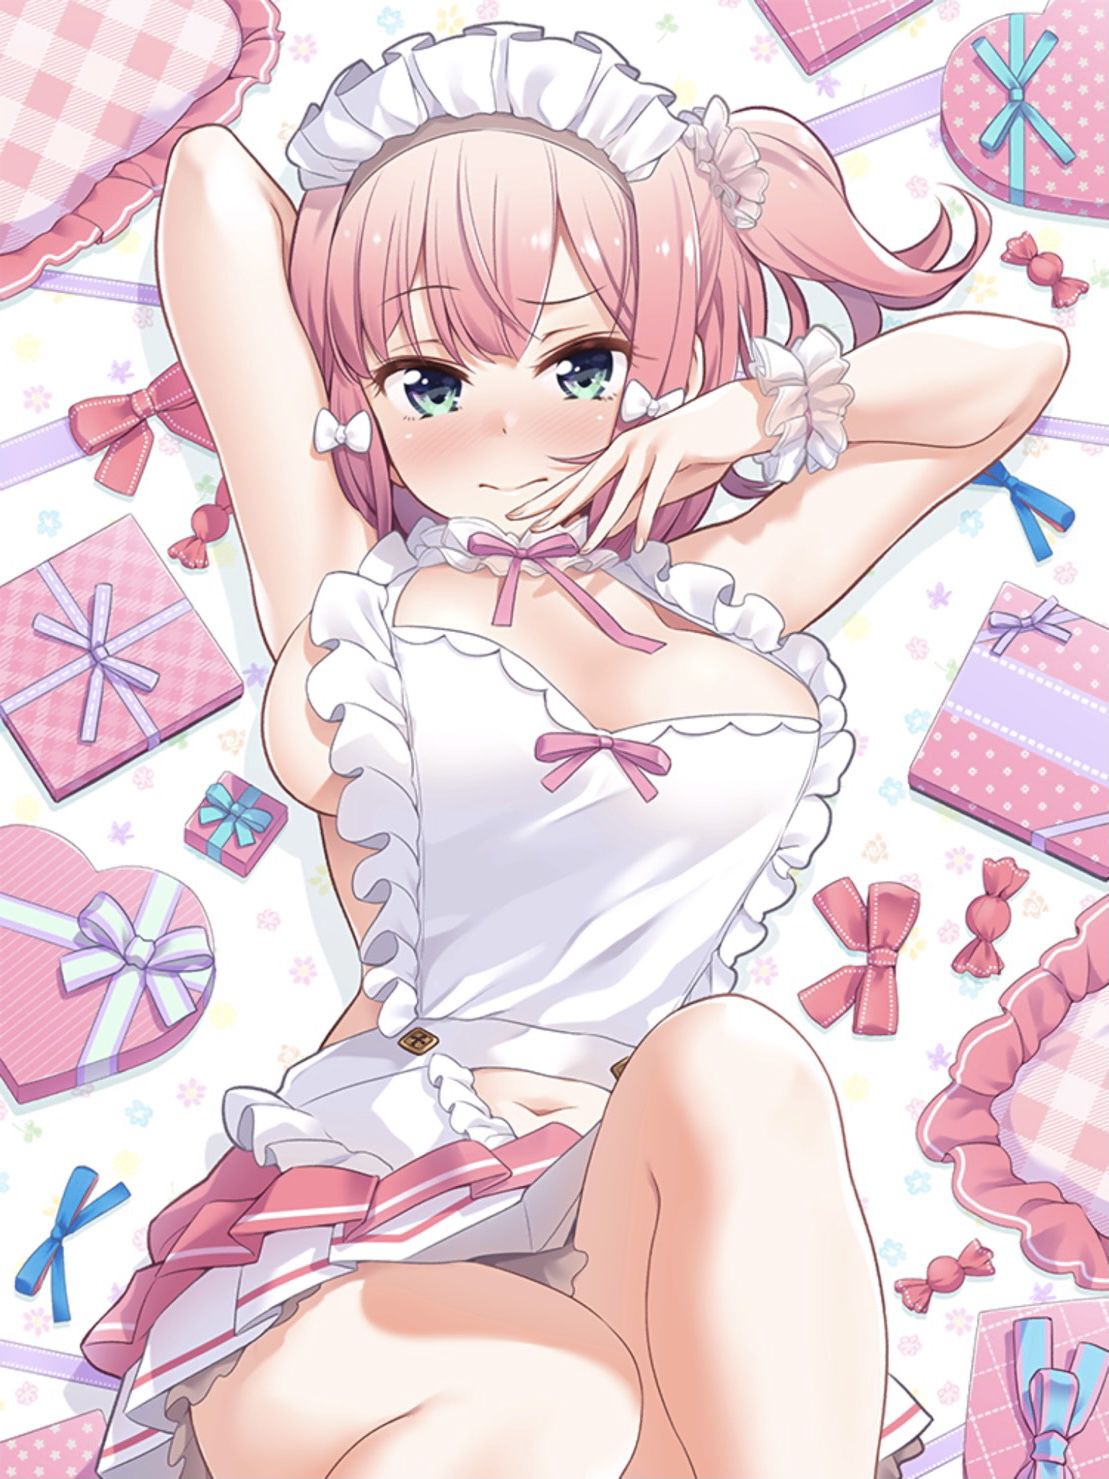 [With images] NEWGAME characters, too many erotic wwwwwww 20